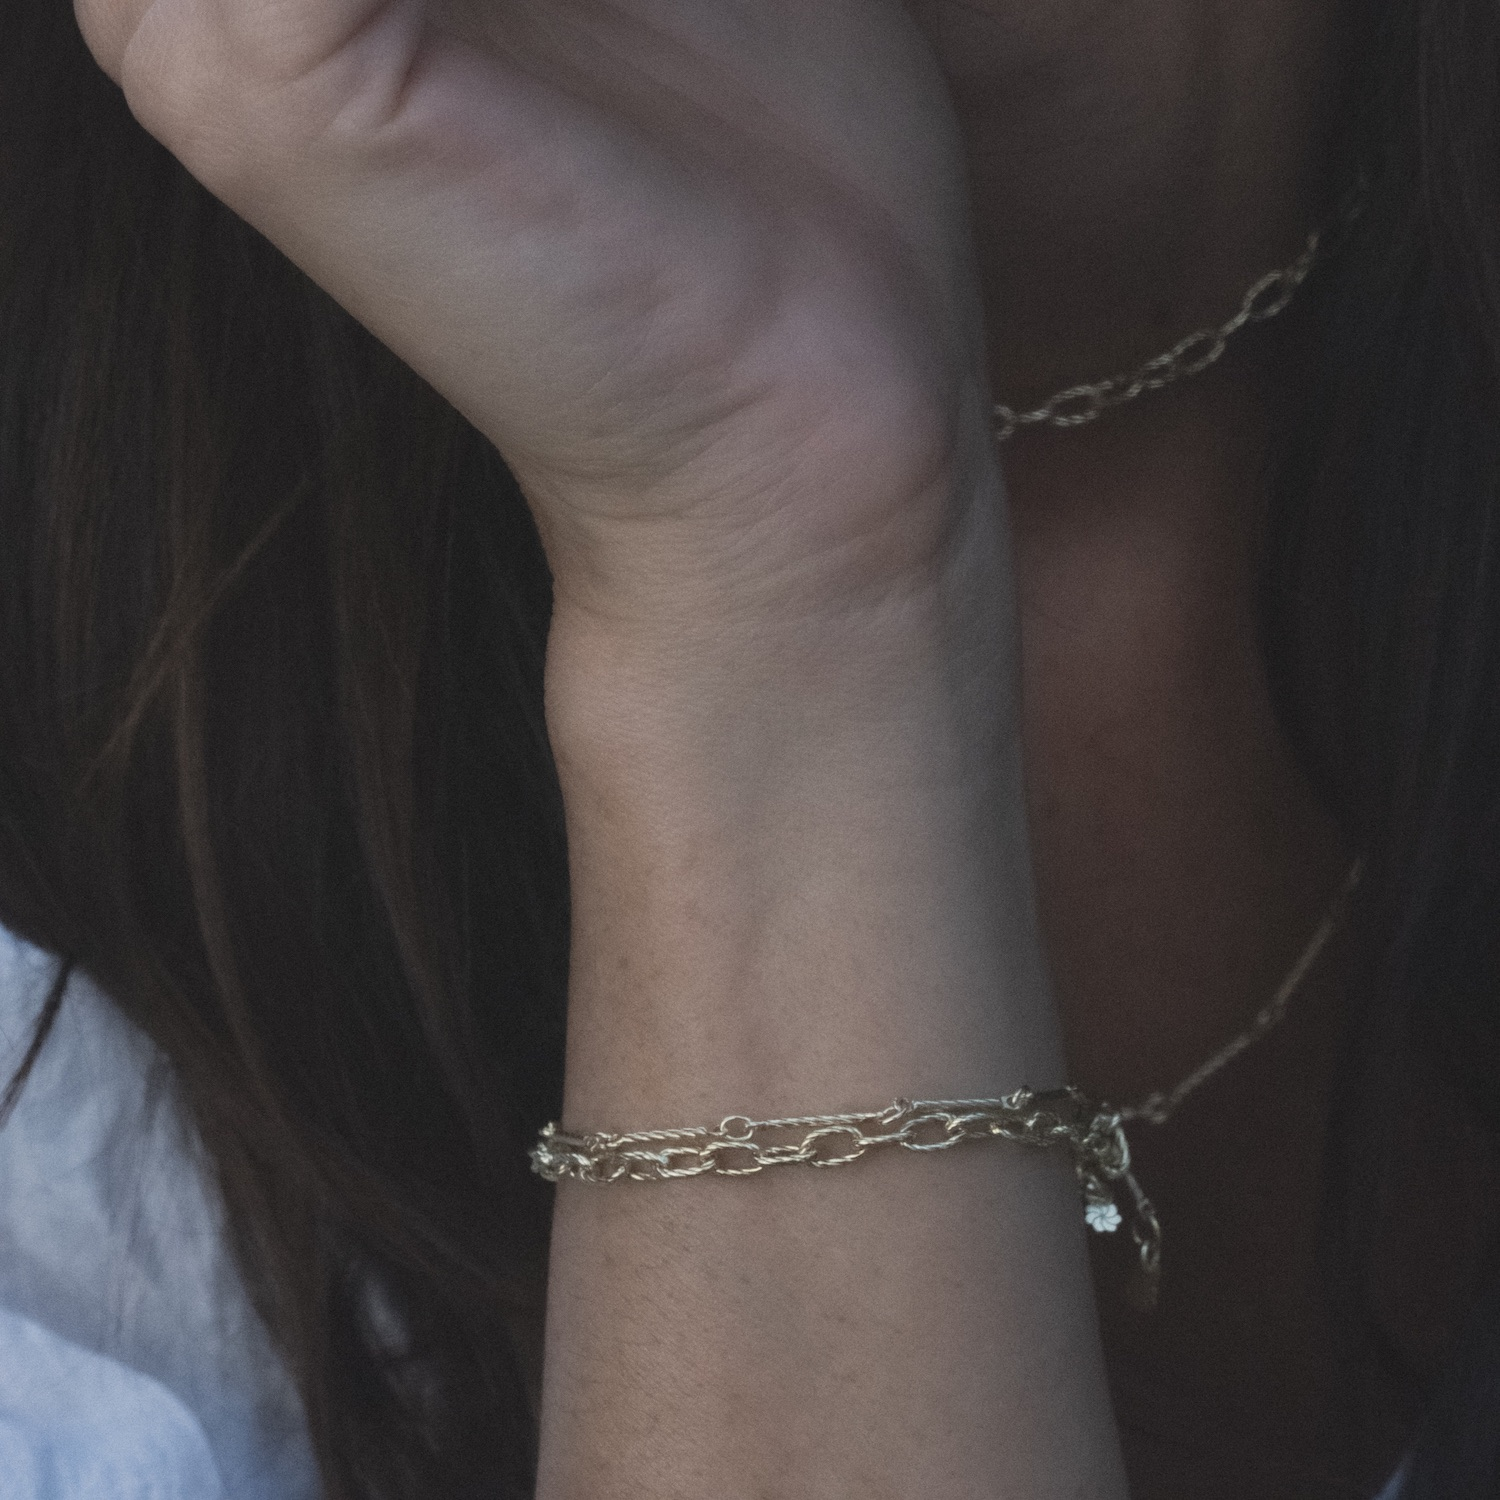 Model's arm wearing Aiden Jae's yellow gold bracelets with twisted texture.